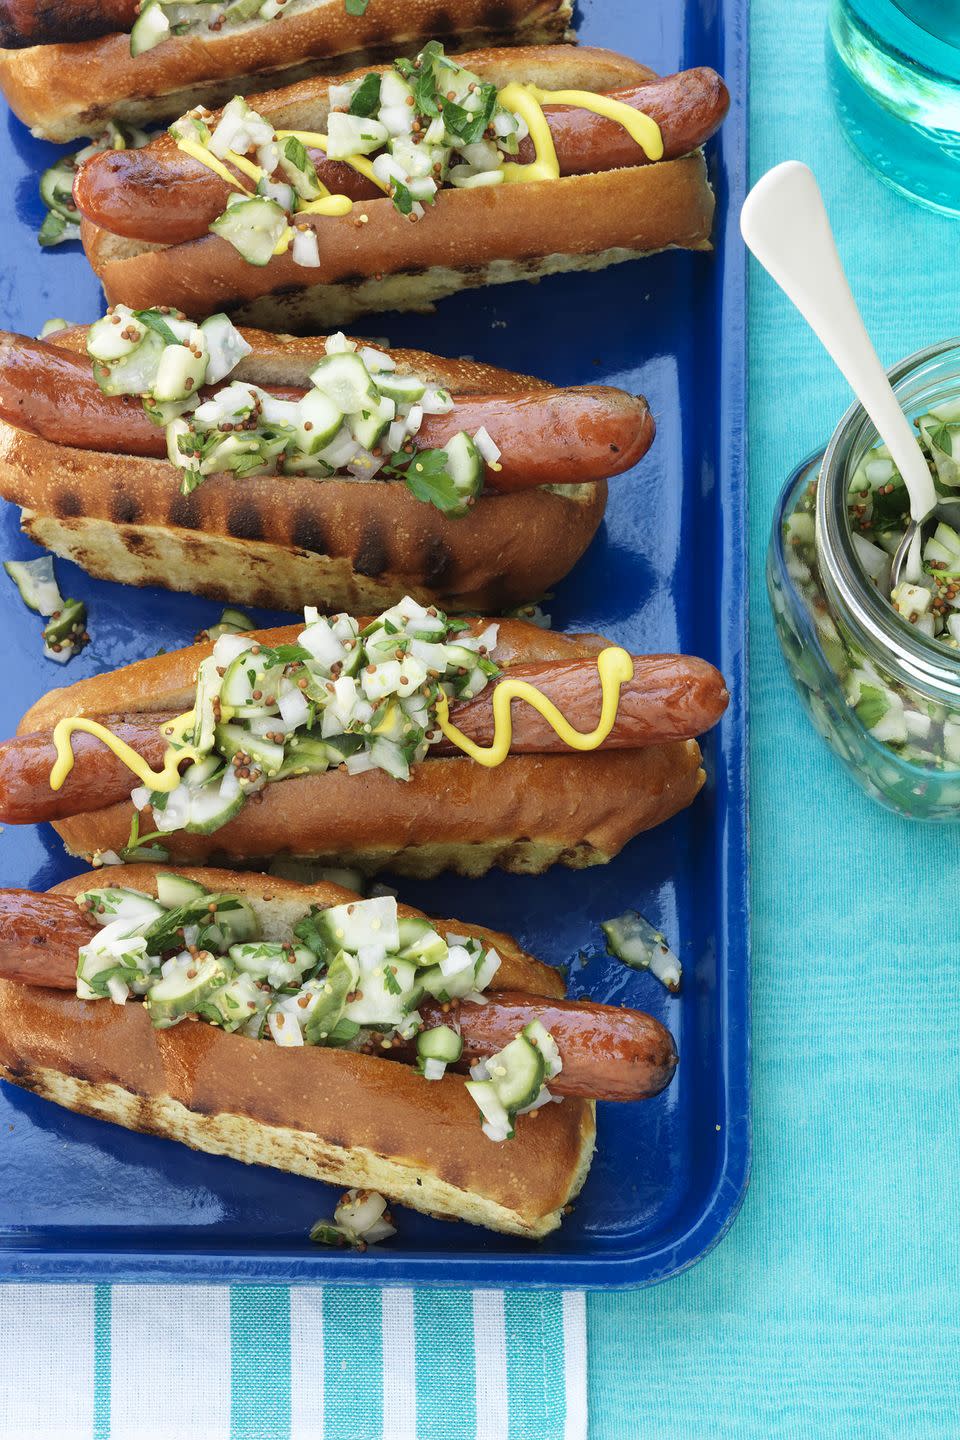 Hot Dogs with Pickle and Parsley Relish